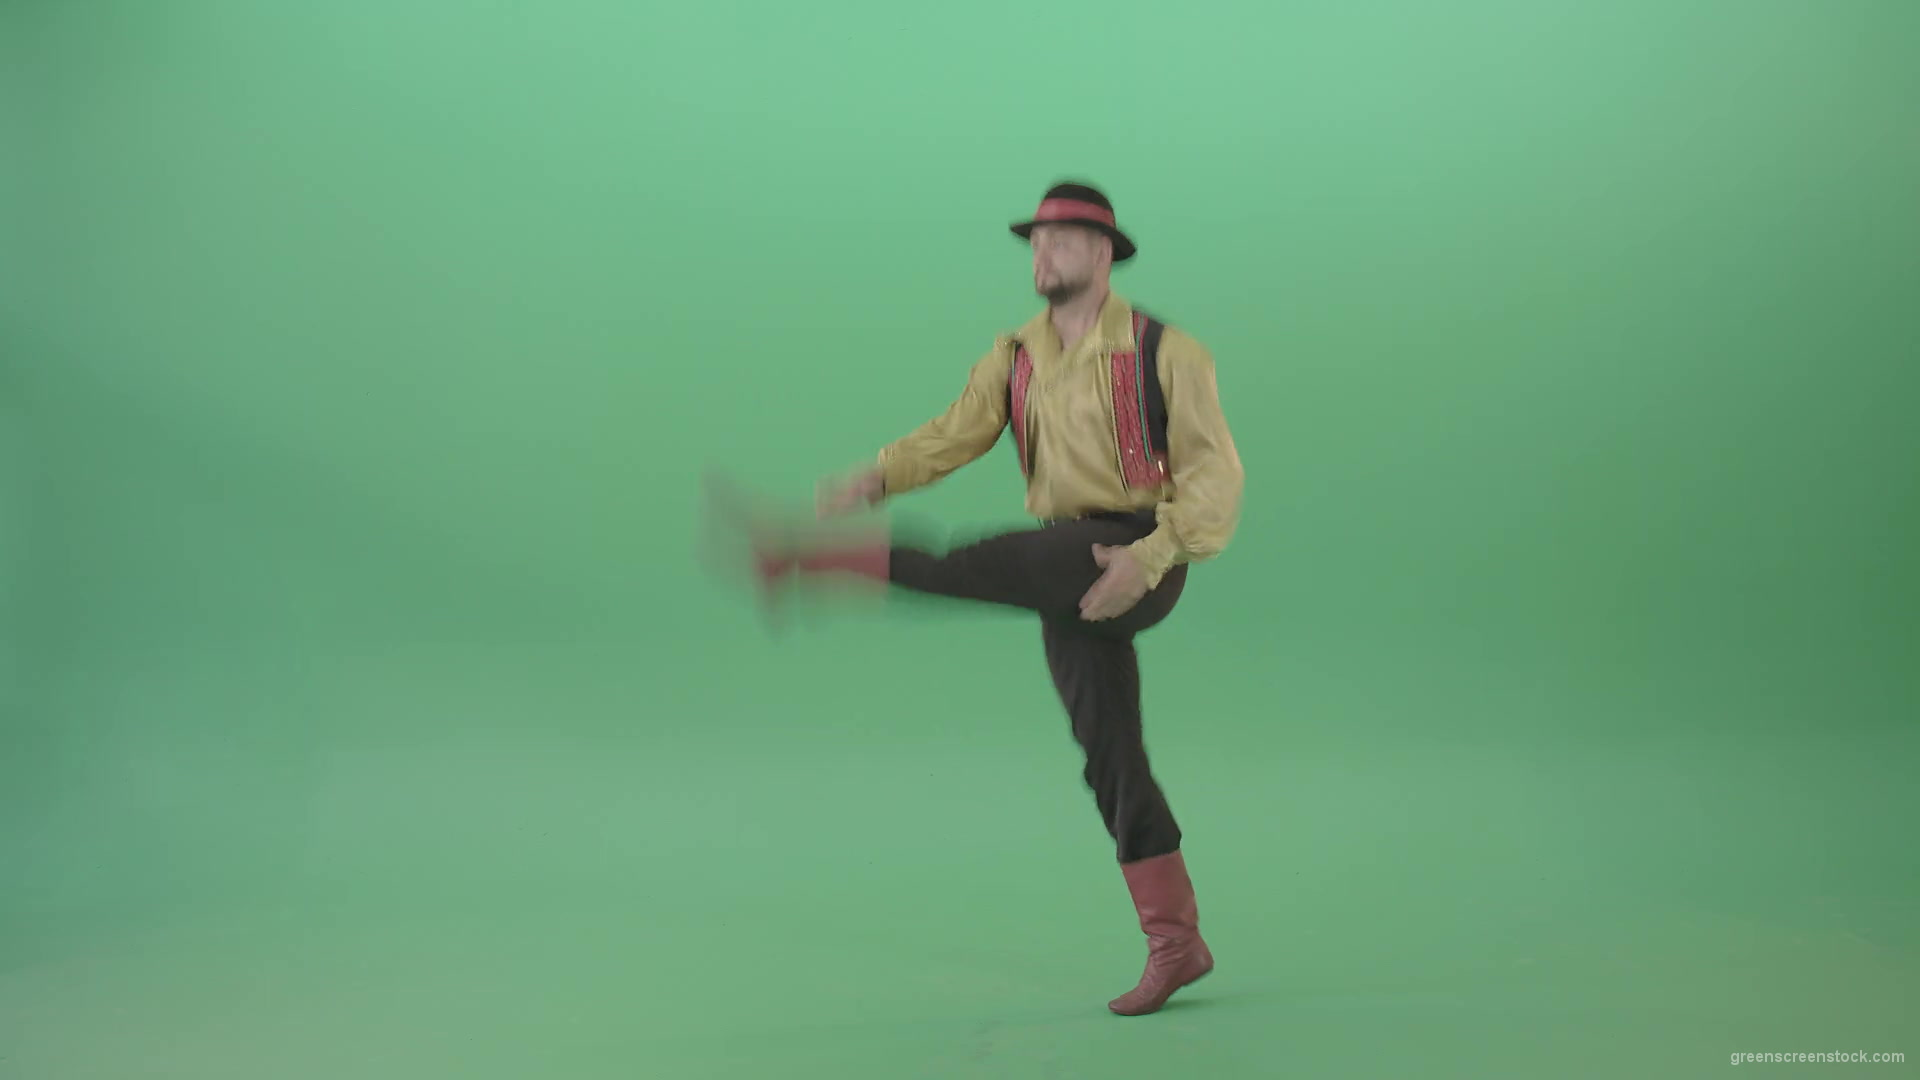 Balcan-gipsy-man-dancer-showing-clapping-moves-isolated-on-green-screen-4K-Video-Footage-1920_005 Green Screen Stock